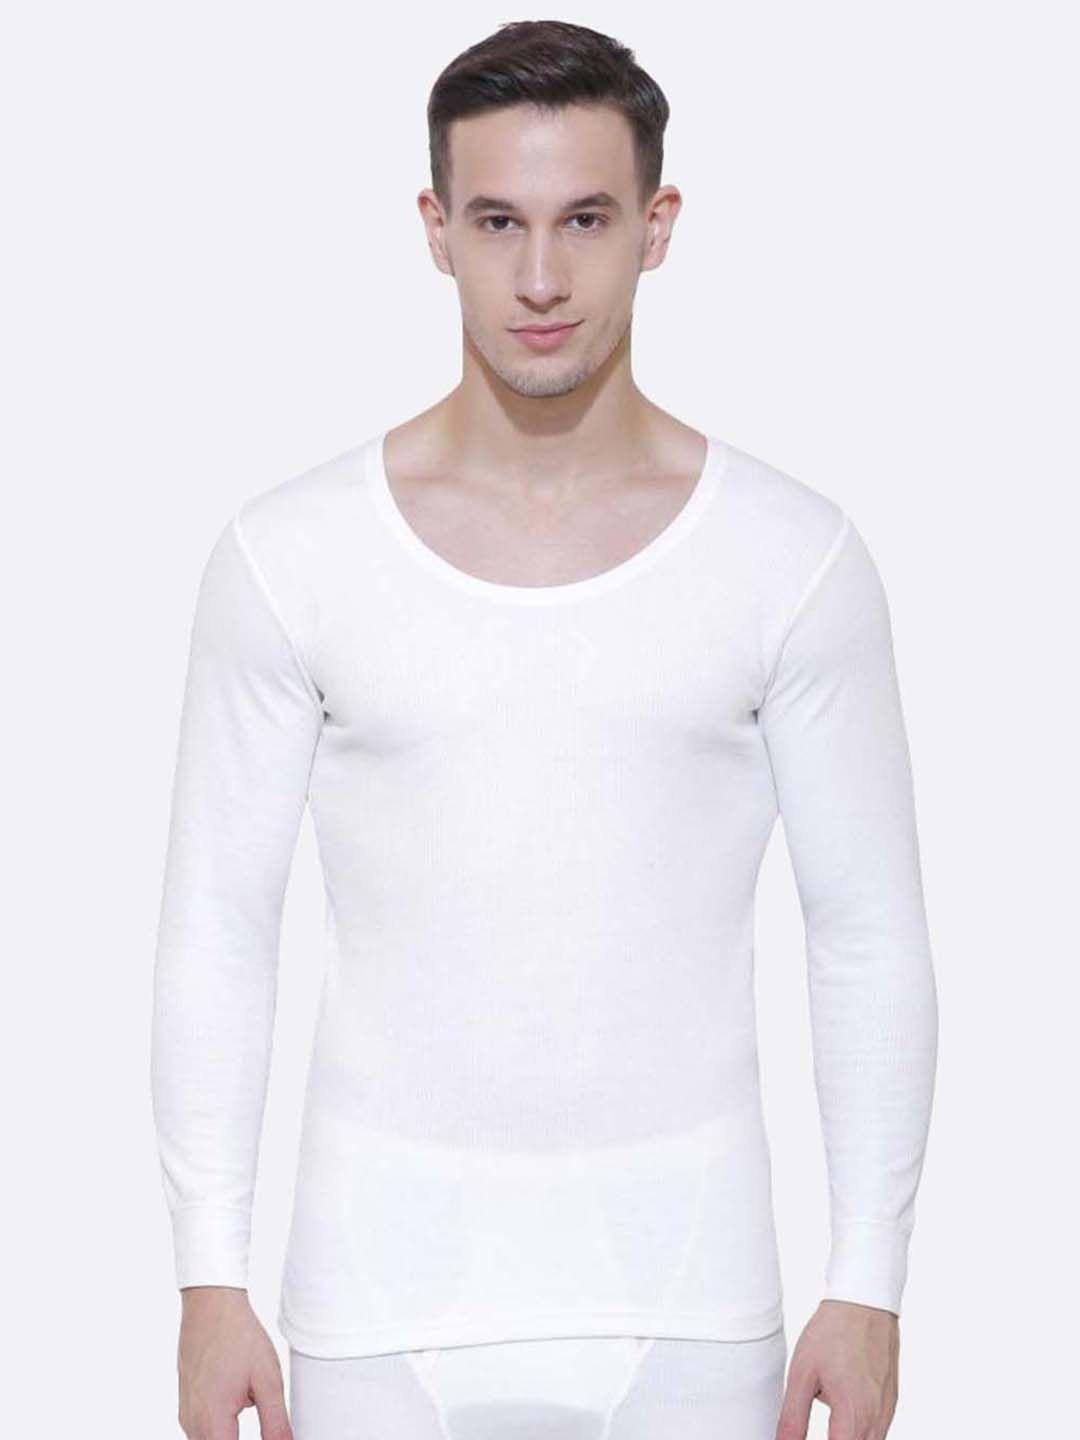 dyca men off white solid cotton thermal tops